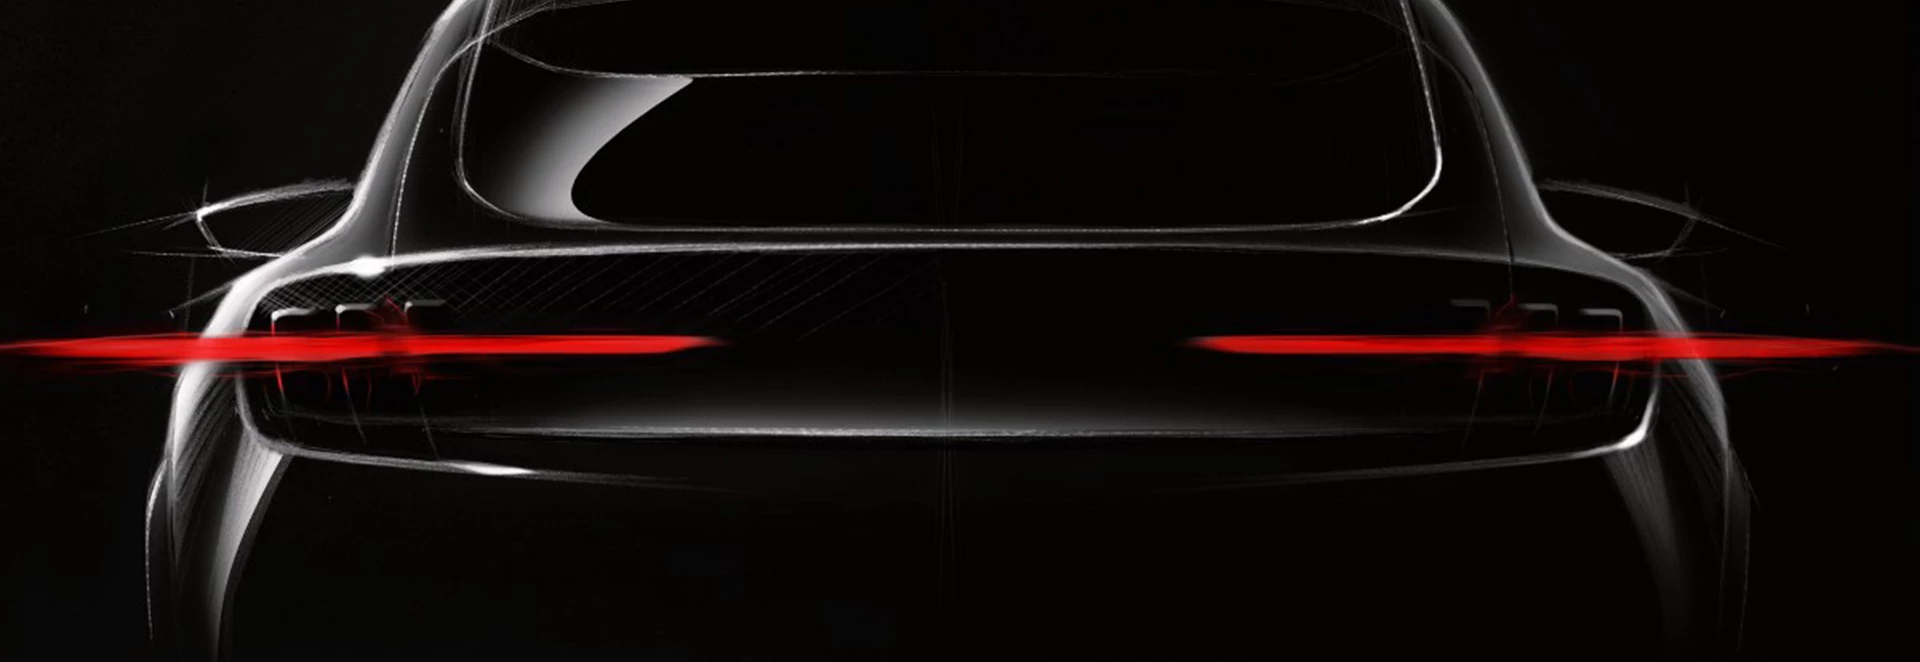  2020 Ford Mustang-inspired electric SUV teased 